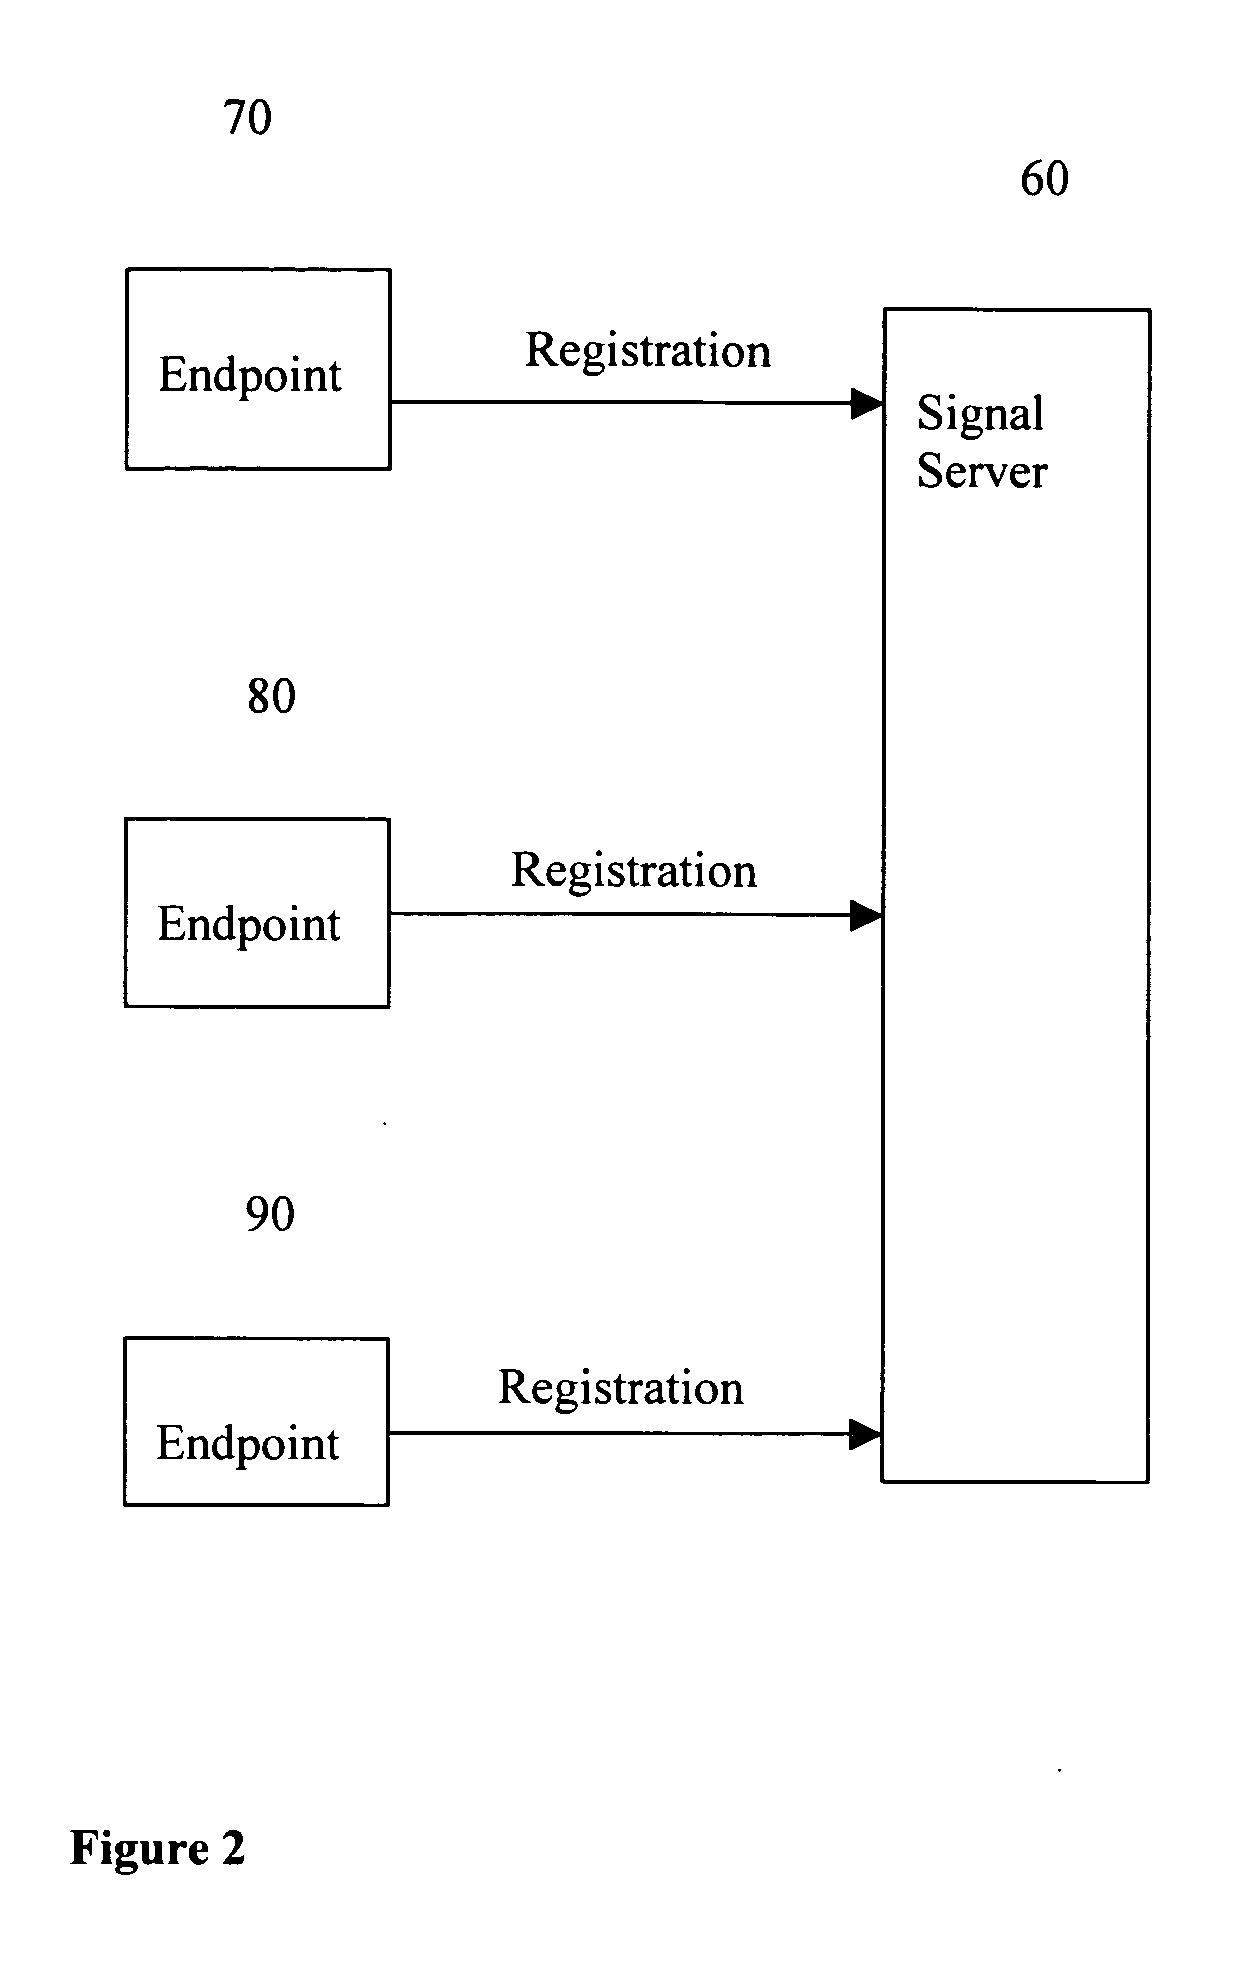 Method to allow voice, video and data conference with minimum bandwidth consumption between two or more geological locations and achieve quality of service (QoS) and scalability